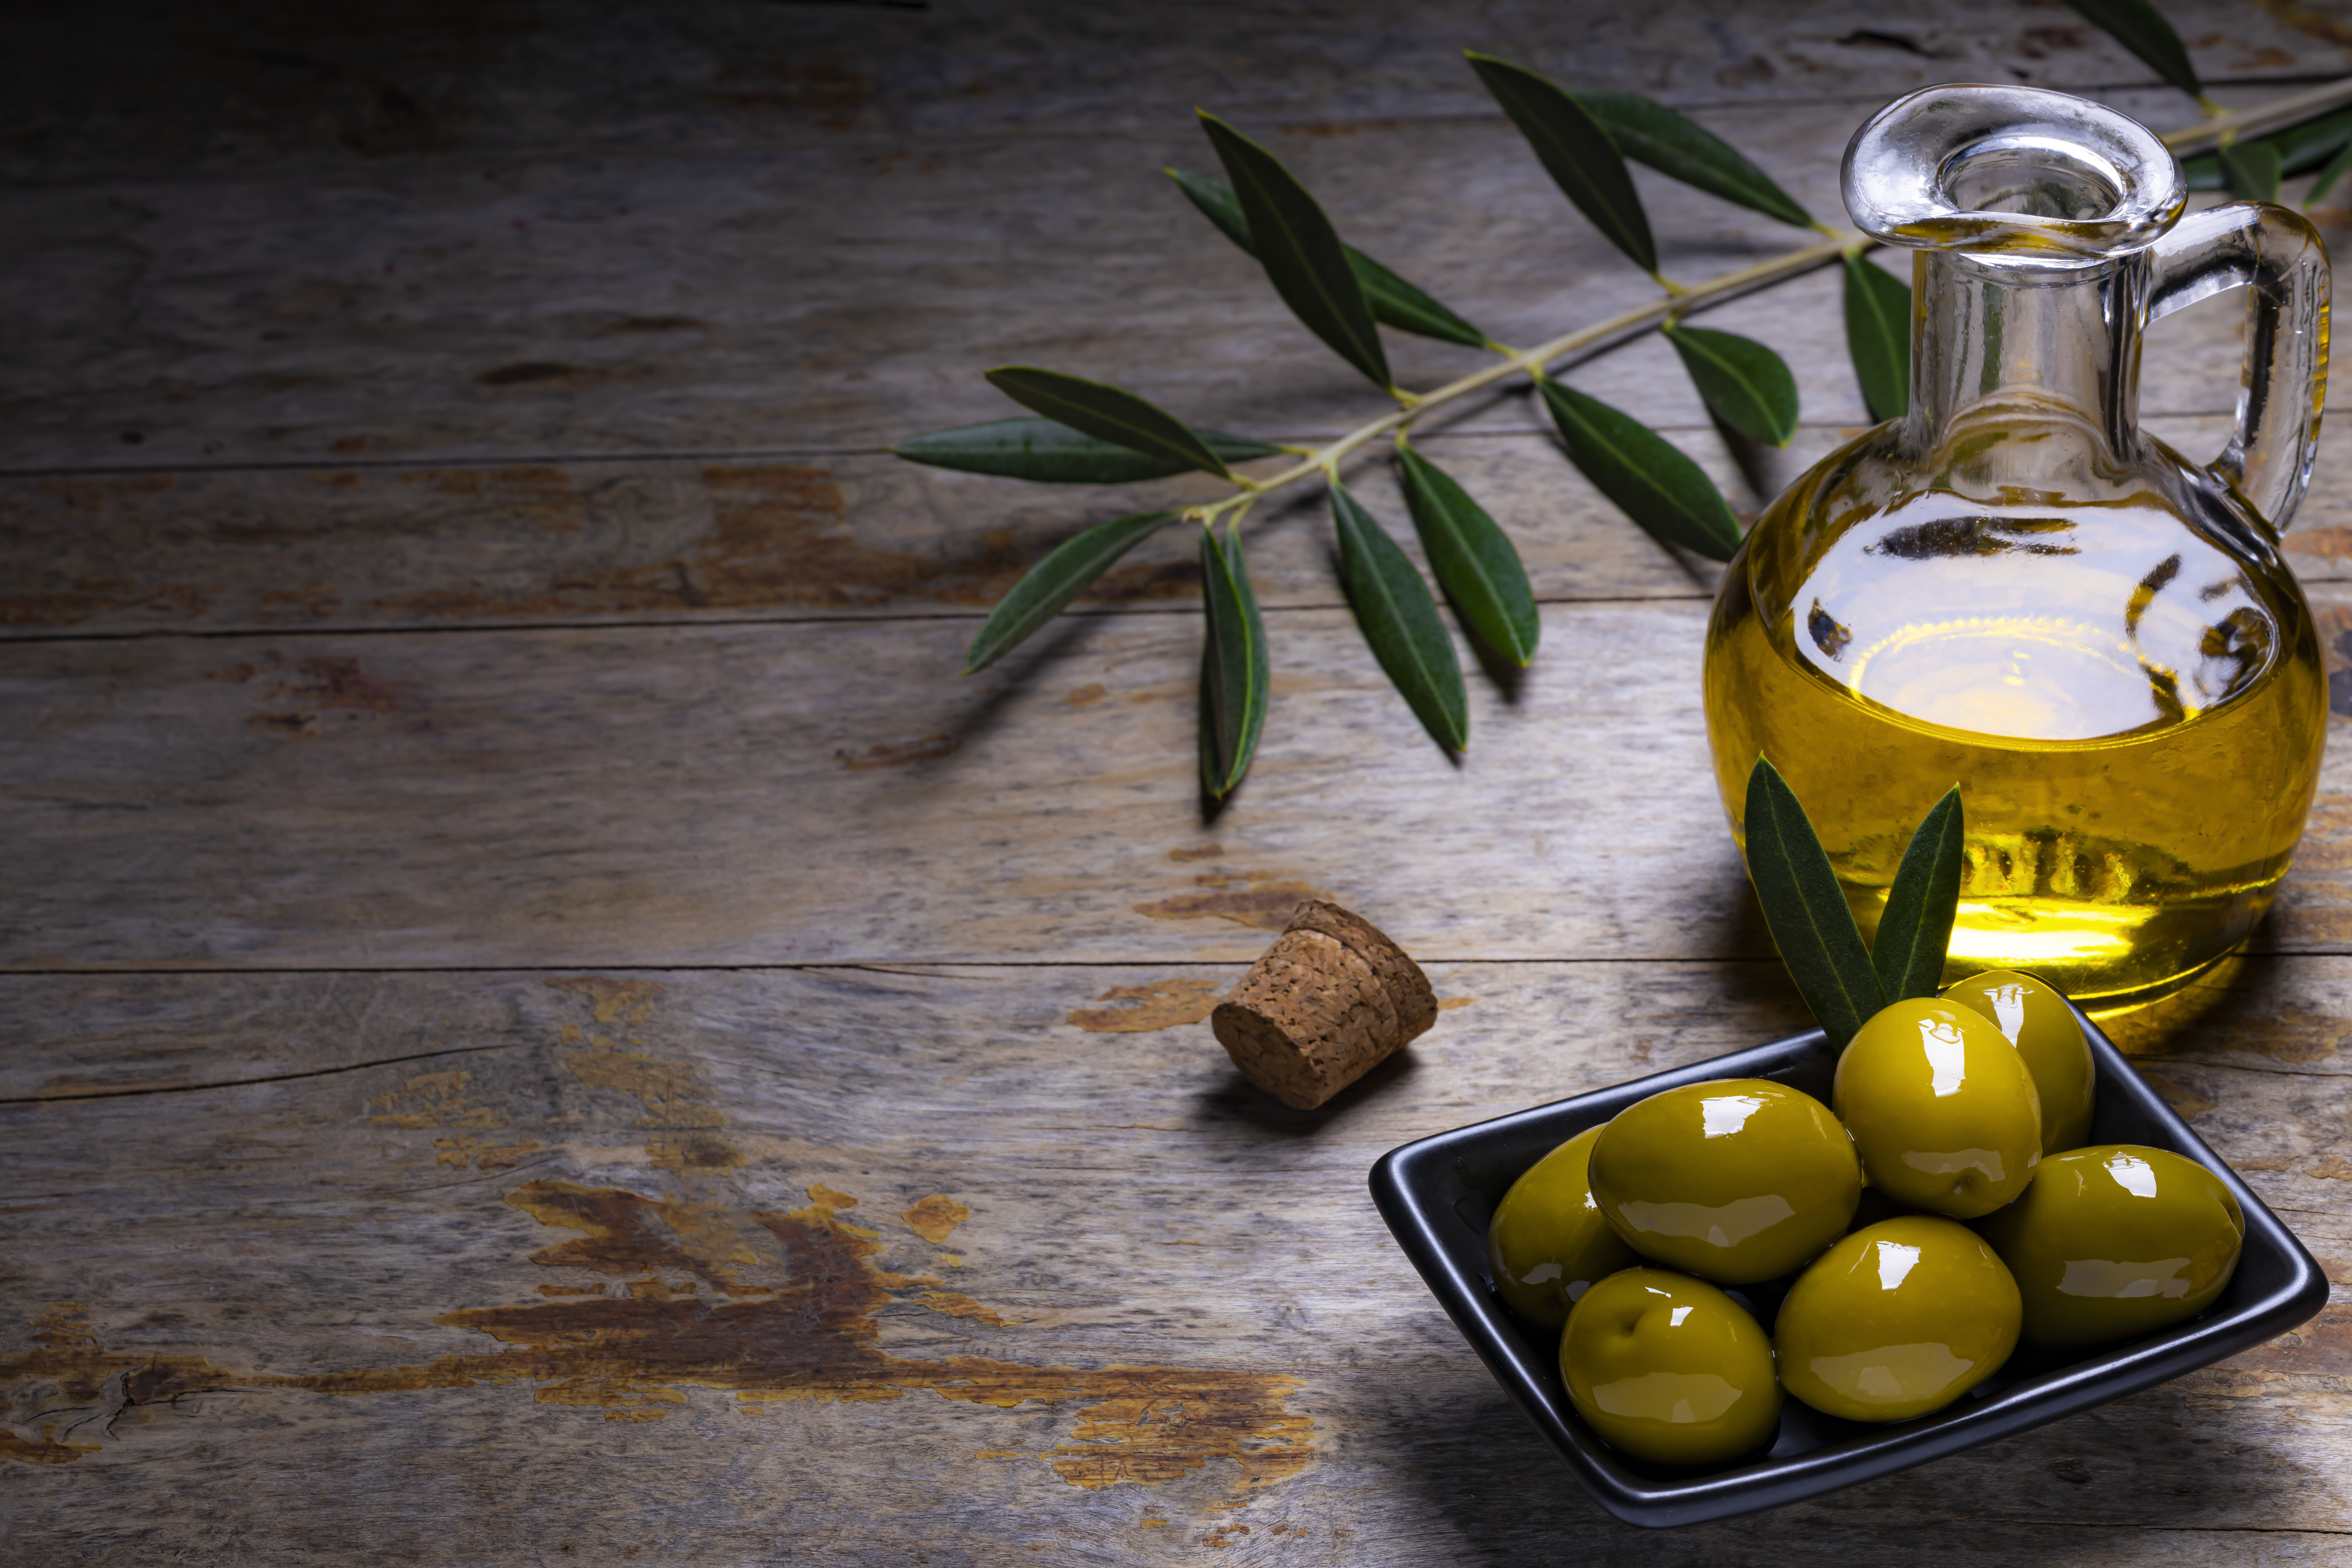 Tasty looking olives extra virgin olive oil and olive leafs on dark wooden background.